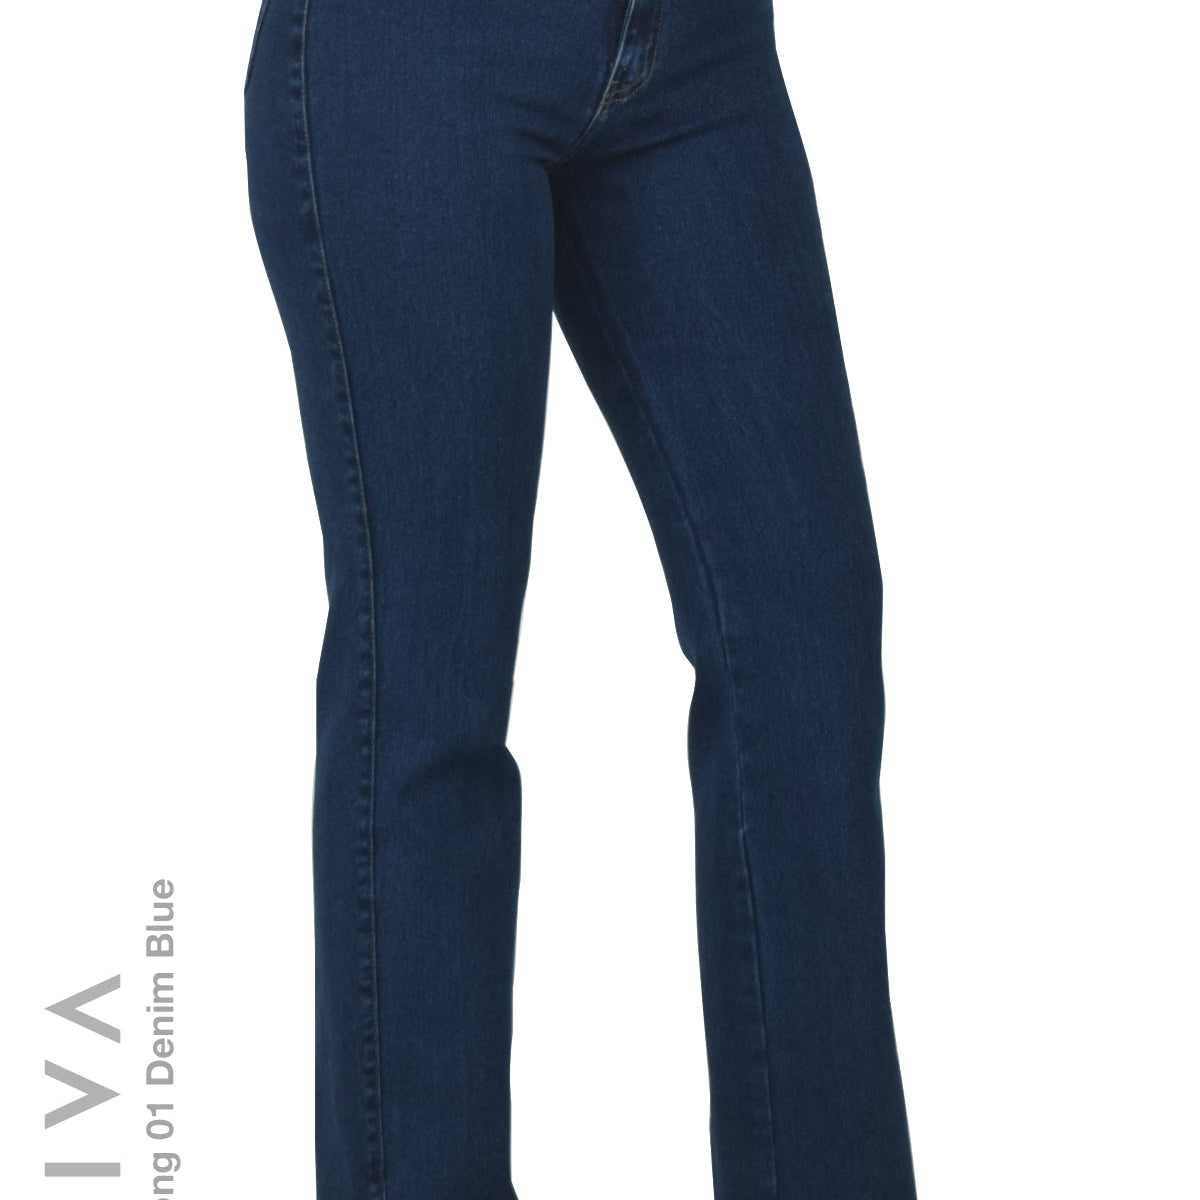 NATIVA, STRETCH JEANS. FERNANDA STRONG 01 DENIM BLUE, High-Rise Fitted  Classic Straight Leg Jeans ESFD (Extreme Stretch Flattering Denim) Fabric  Ideal